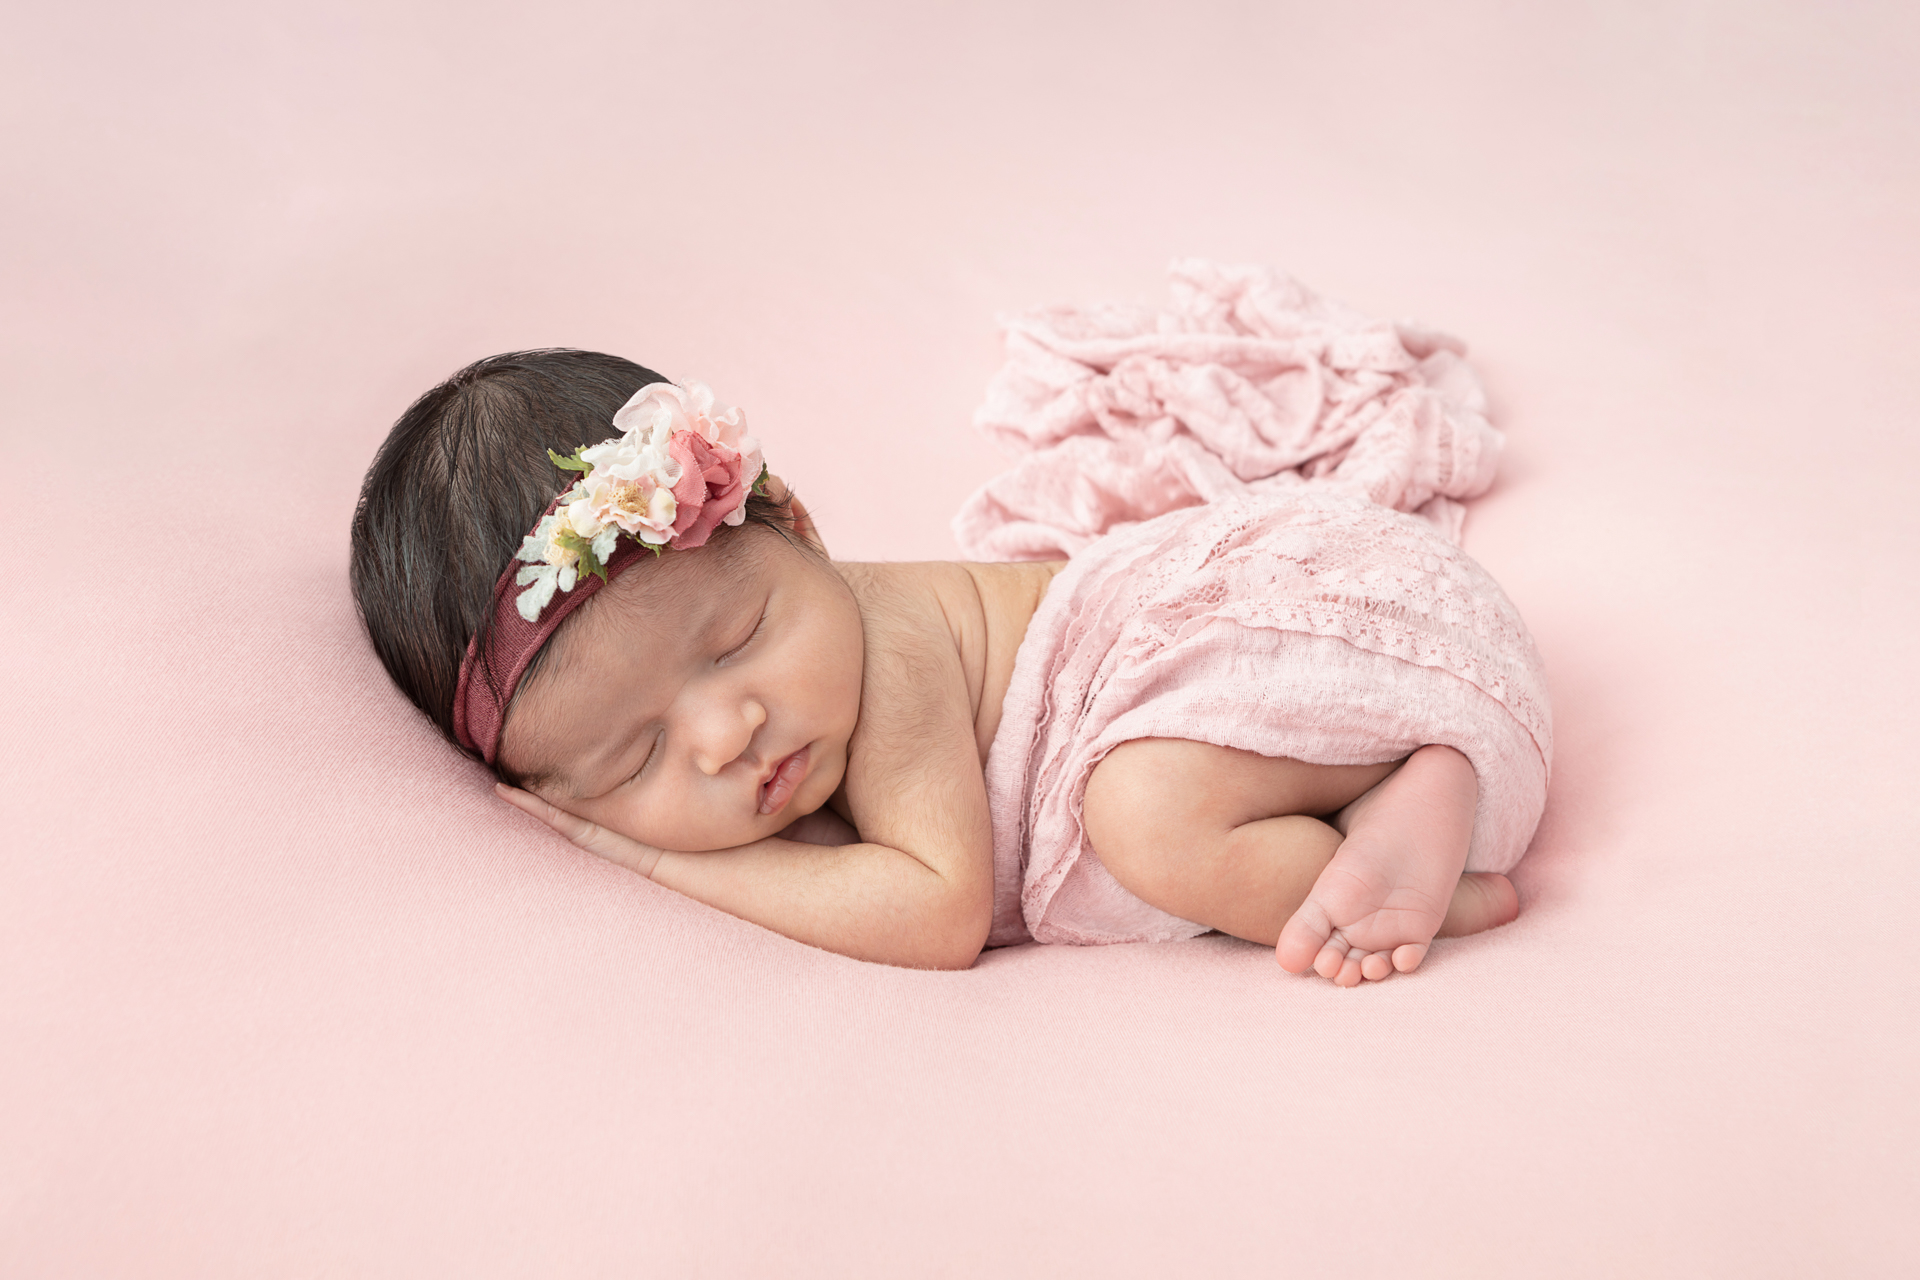 baby girl asleep on a pink backdrop and wrapped in a pink swaddle while wearing a floral headband